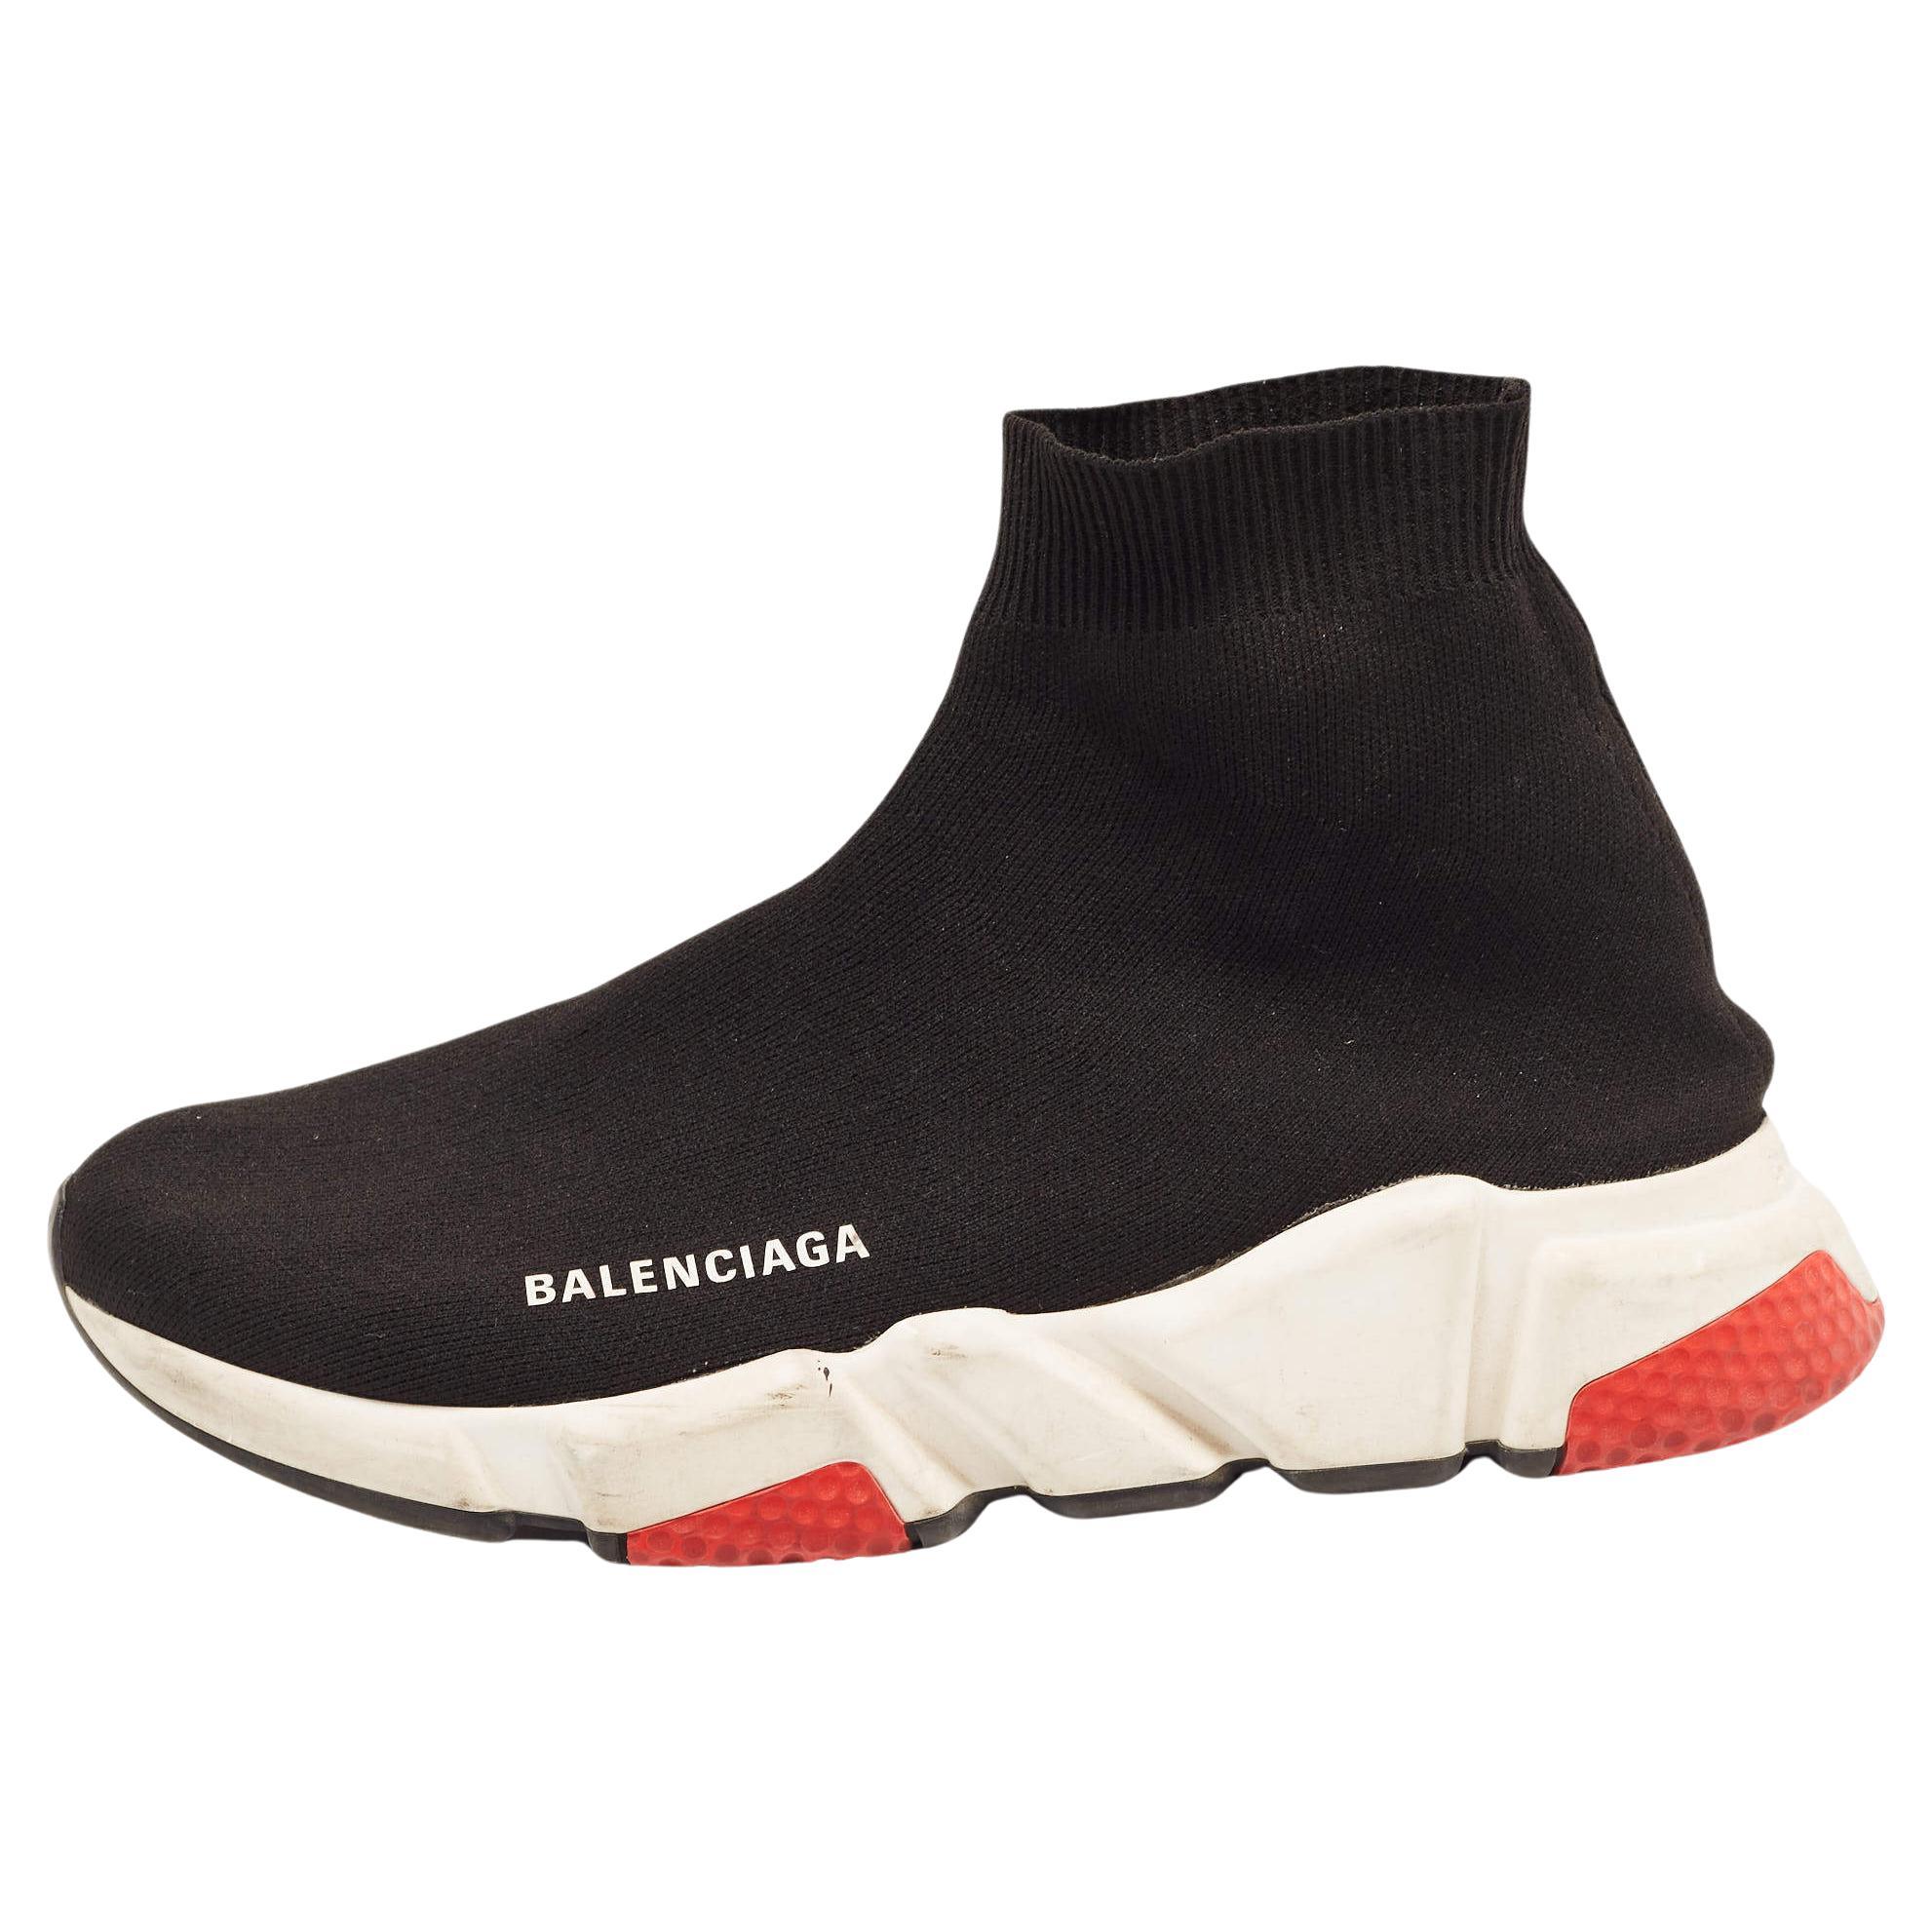 Balenciaga Black Knit Fabric Speed Trainer High Top Sneakers Size 39 For Sale